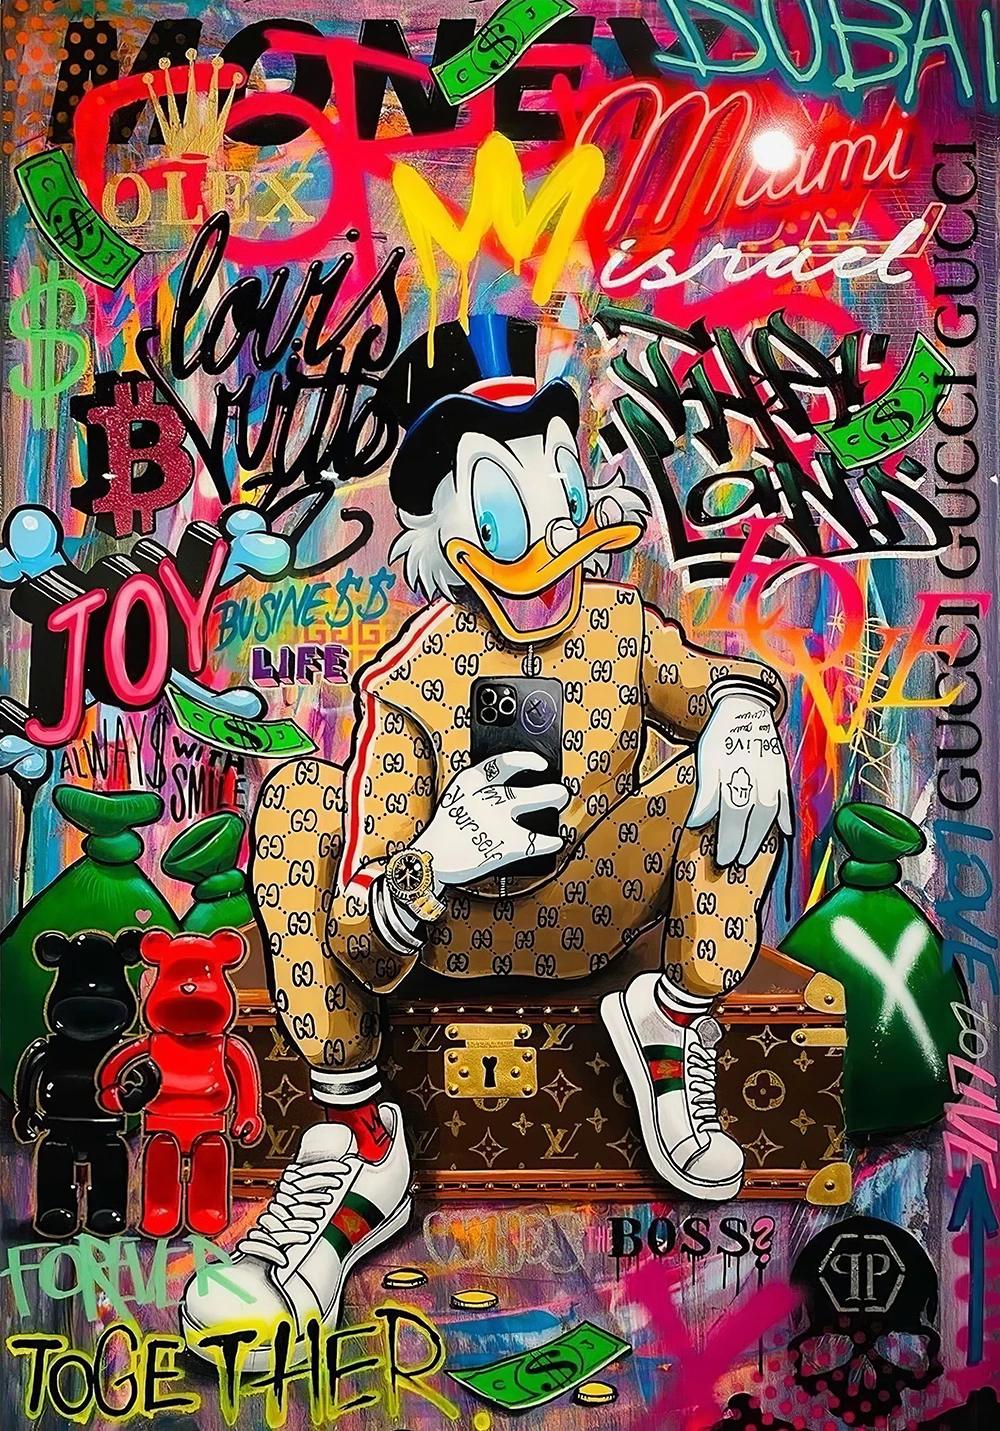 Wholesale Cartoon Duck Graffiti Money Wall Art Pictures and Street